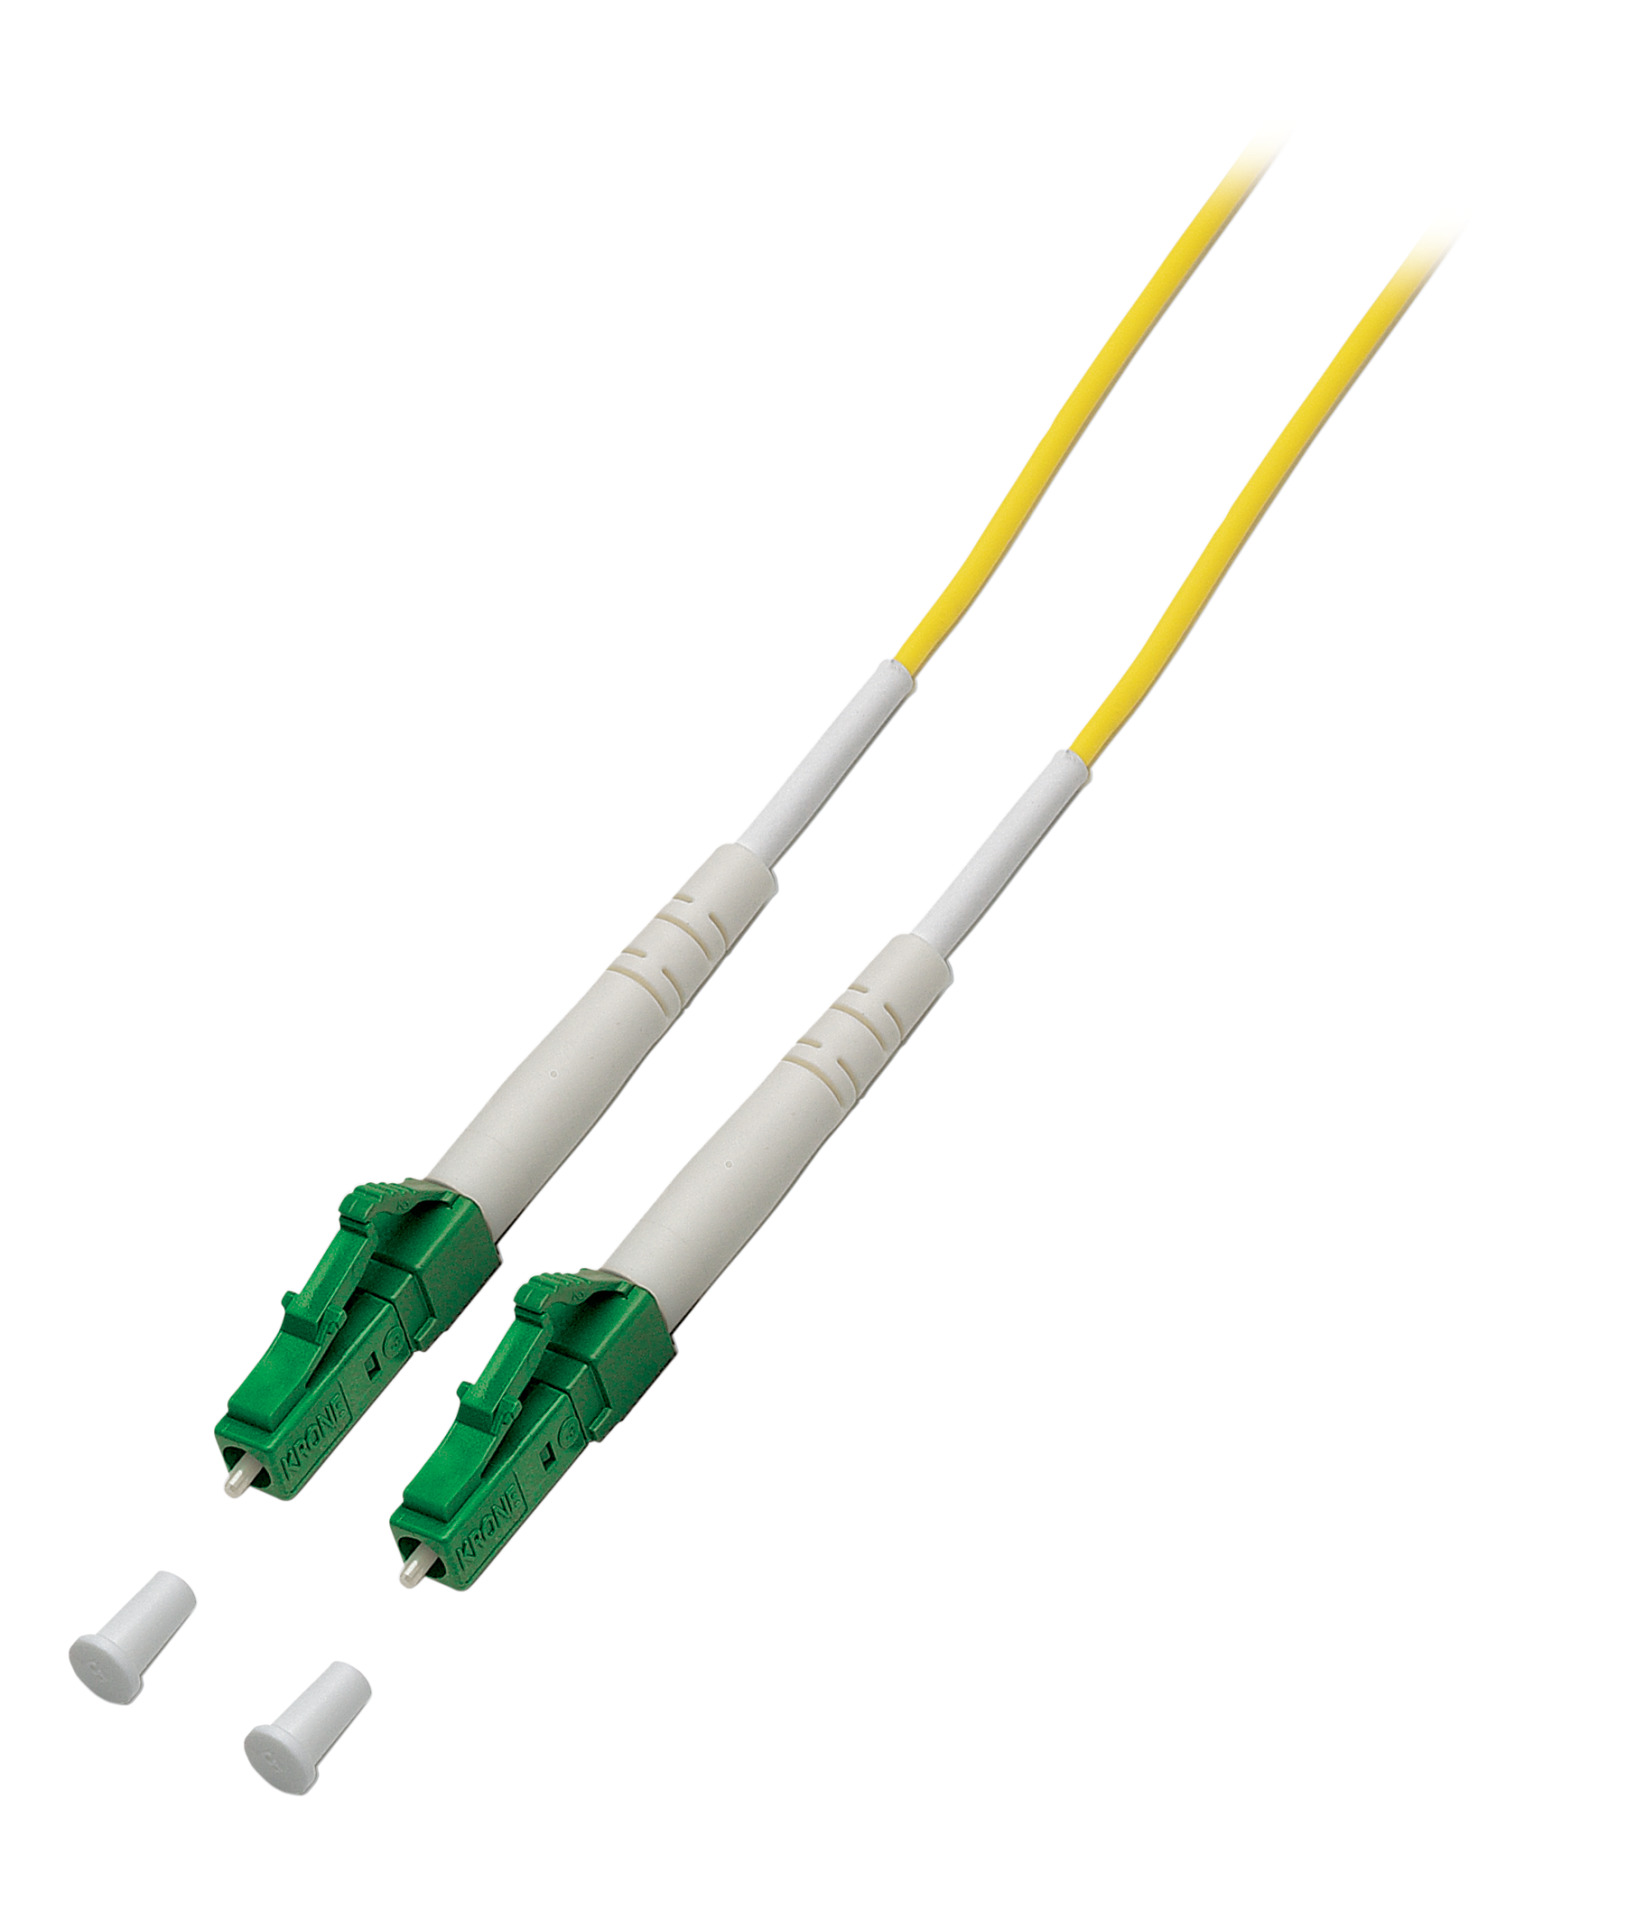 Simplex FO Patch Cable LC/APC-LC/APC G657.A2 20m 2,0mm yellow 9/125µm